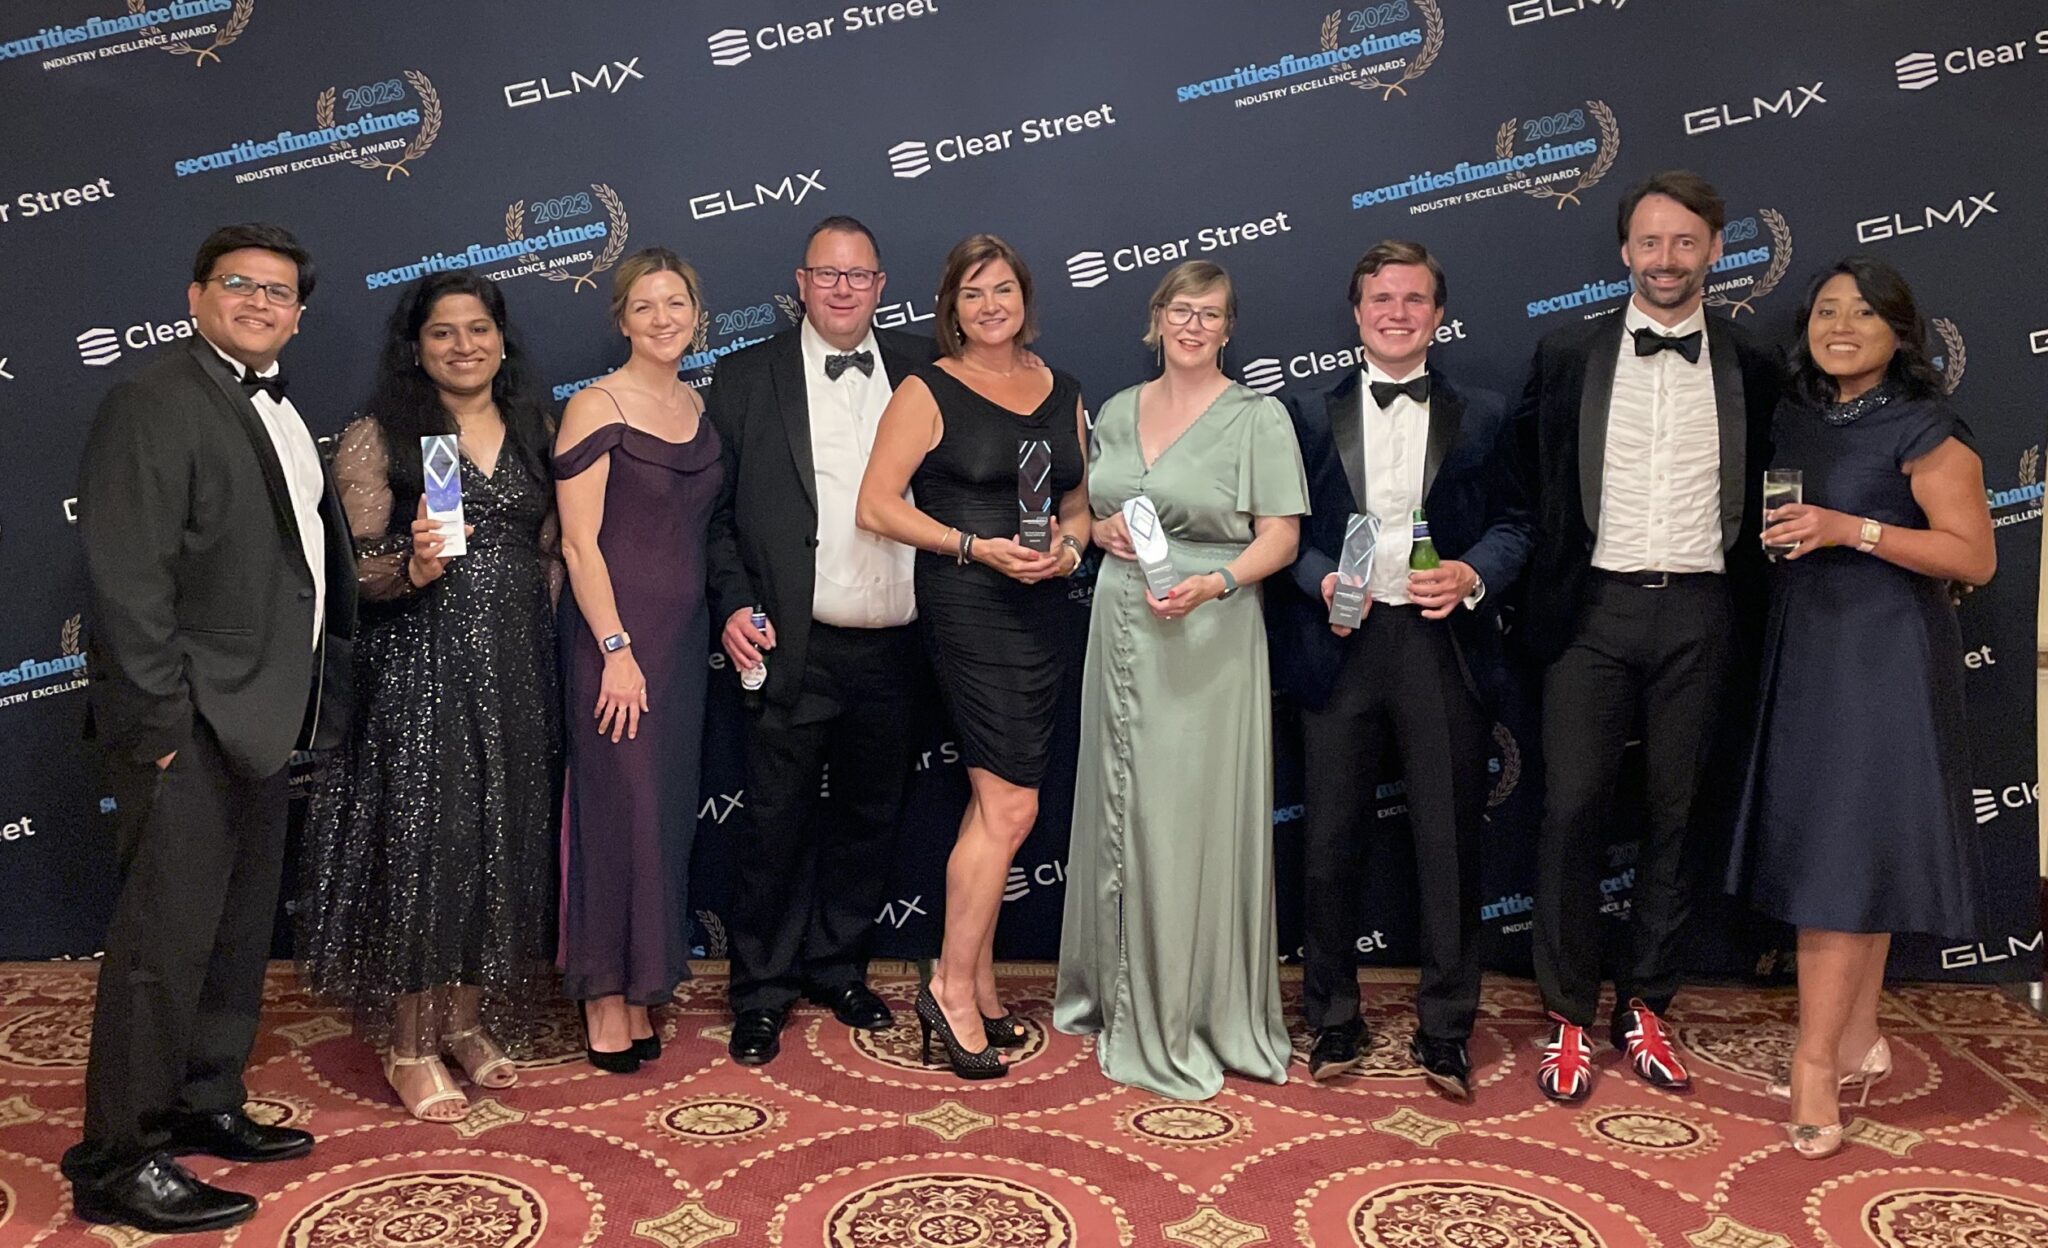 Securities Finance Times Industry Excellence Awards 2023